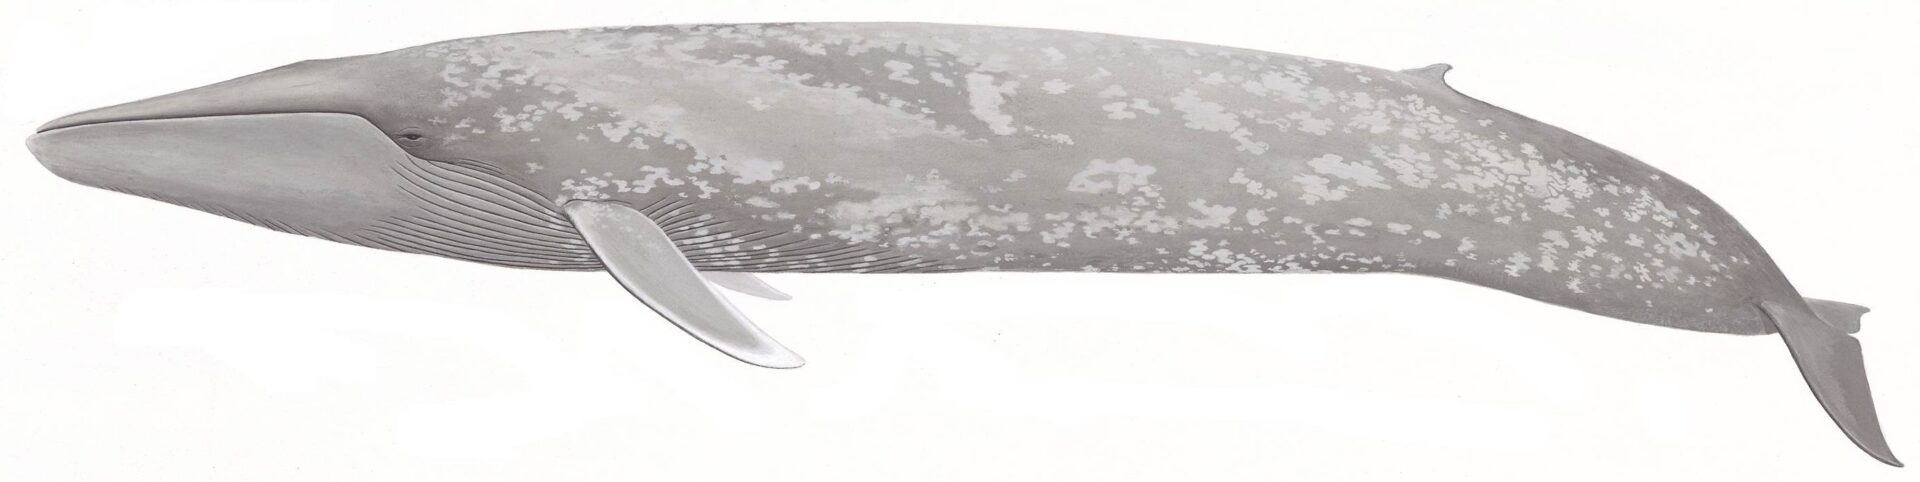 A gray and white table with a knife on it